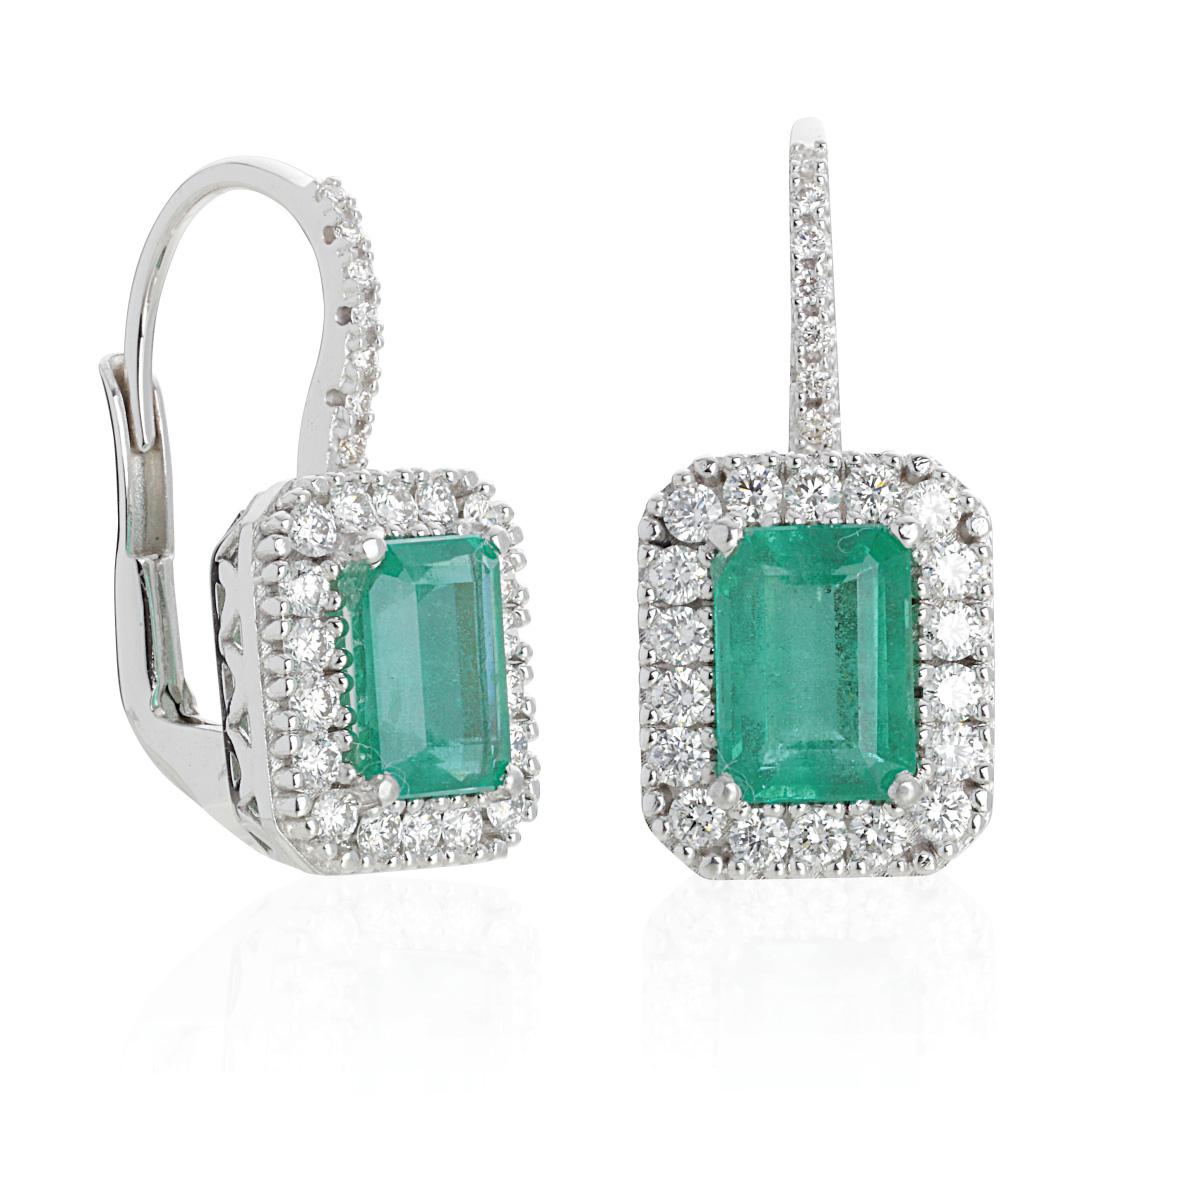 Hook earrings in 18kt white gold with diamonds and natural emerald - OD449/SM-LB